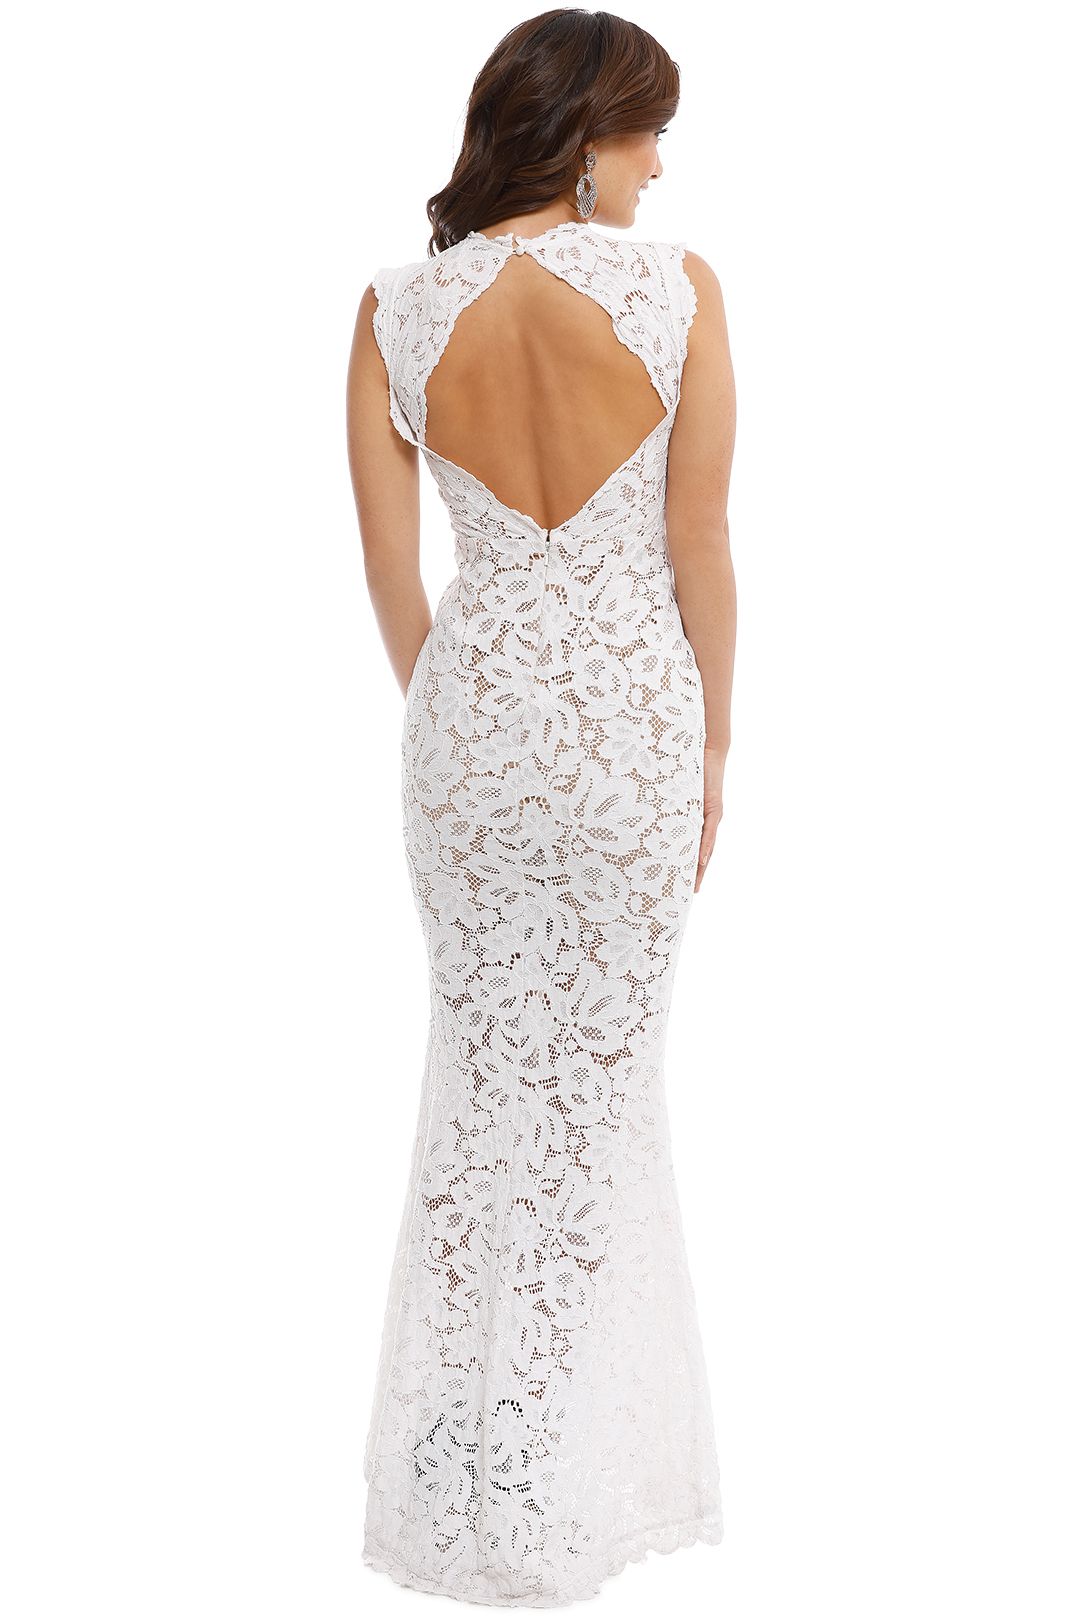 Grace and Hart - Valentine Gown - Ivory - Back